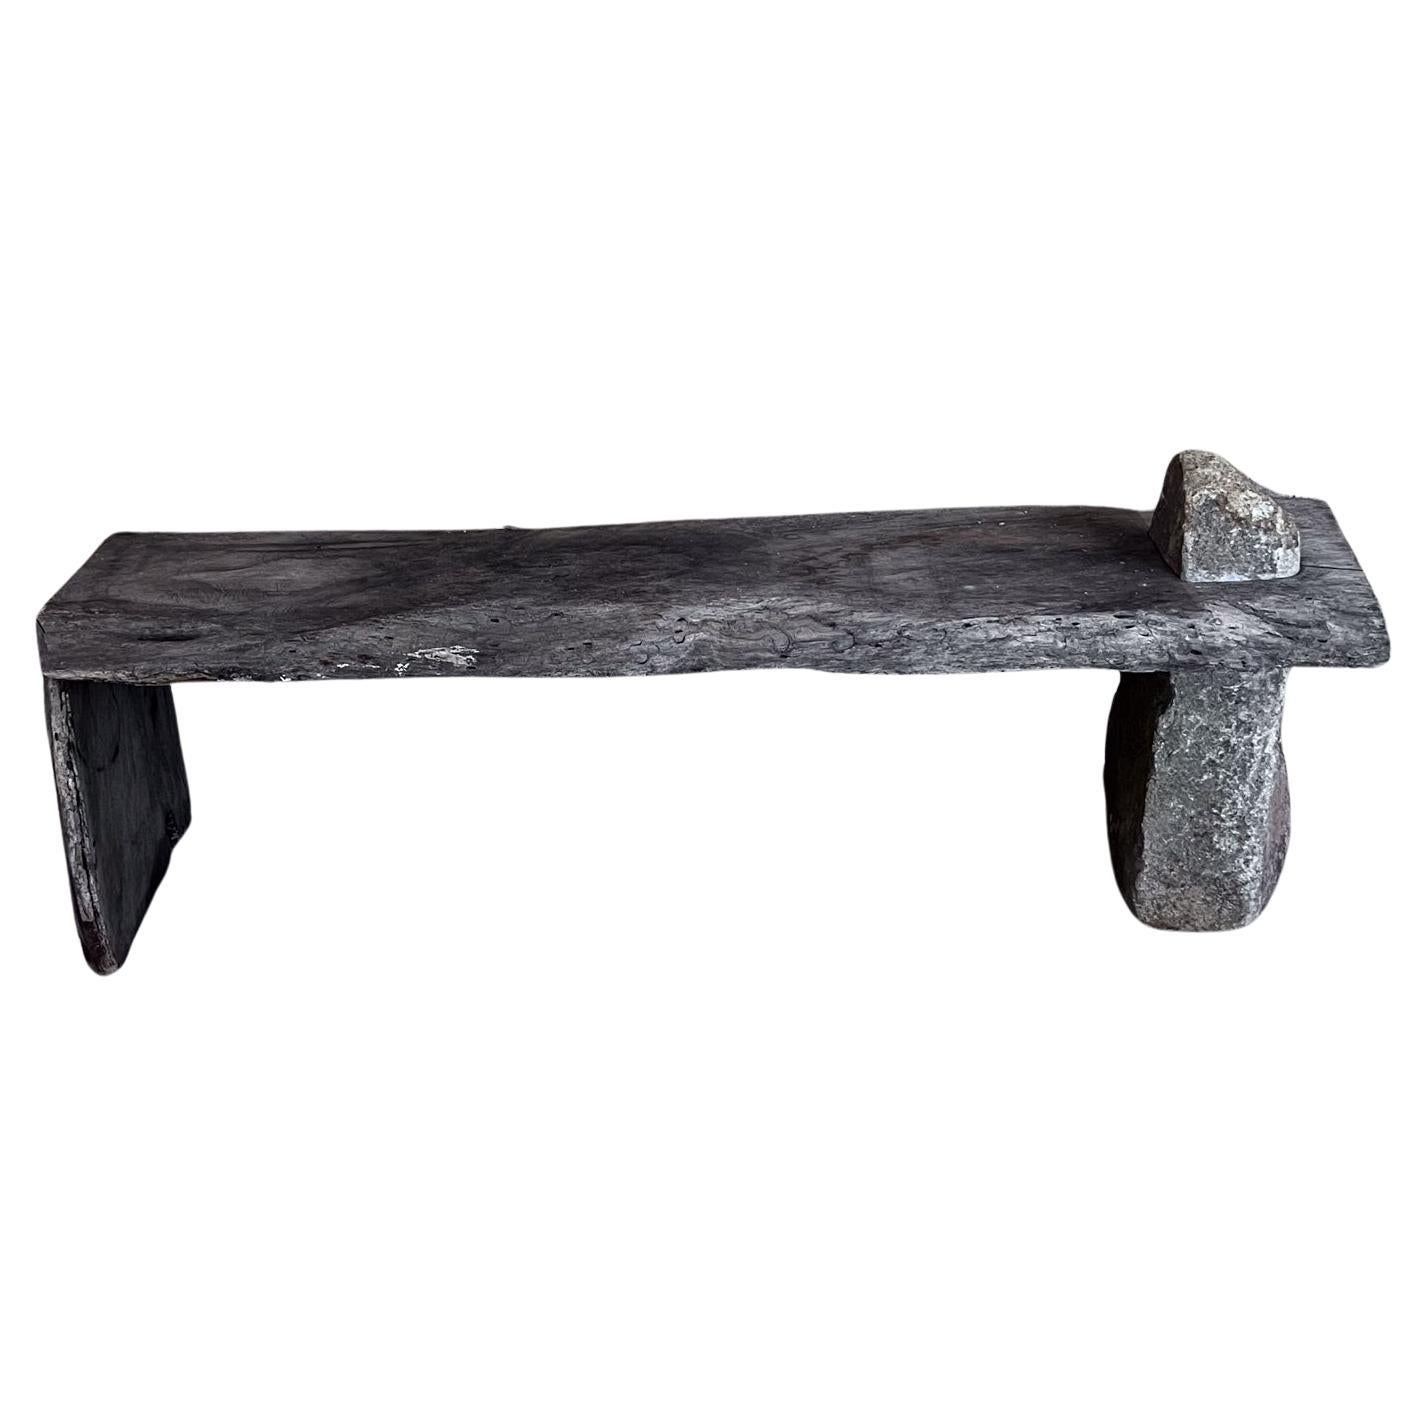 Primitive Rustic Bench Spanish Mesquite Wood and Rock Stone